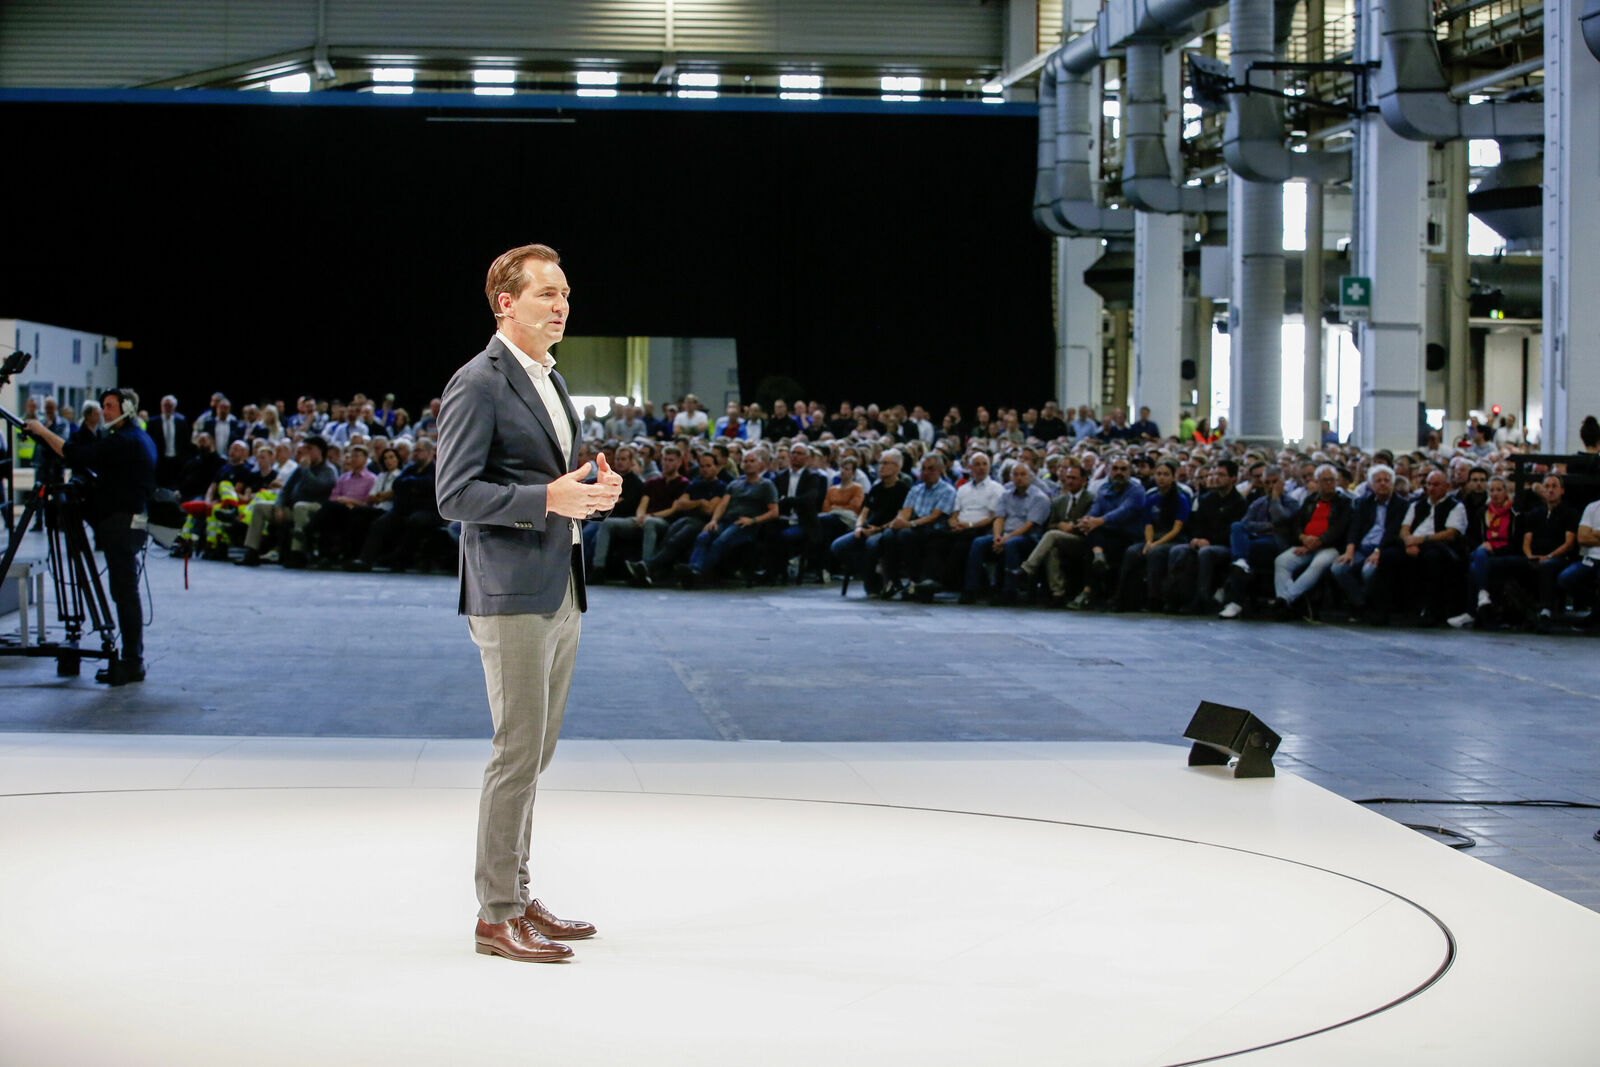 Thomas Schäfer, CEO of Volkswagen Passenger Cars, at the works meeting at the Wolfsburg plant